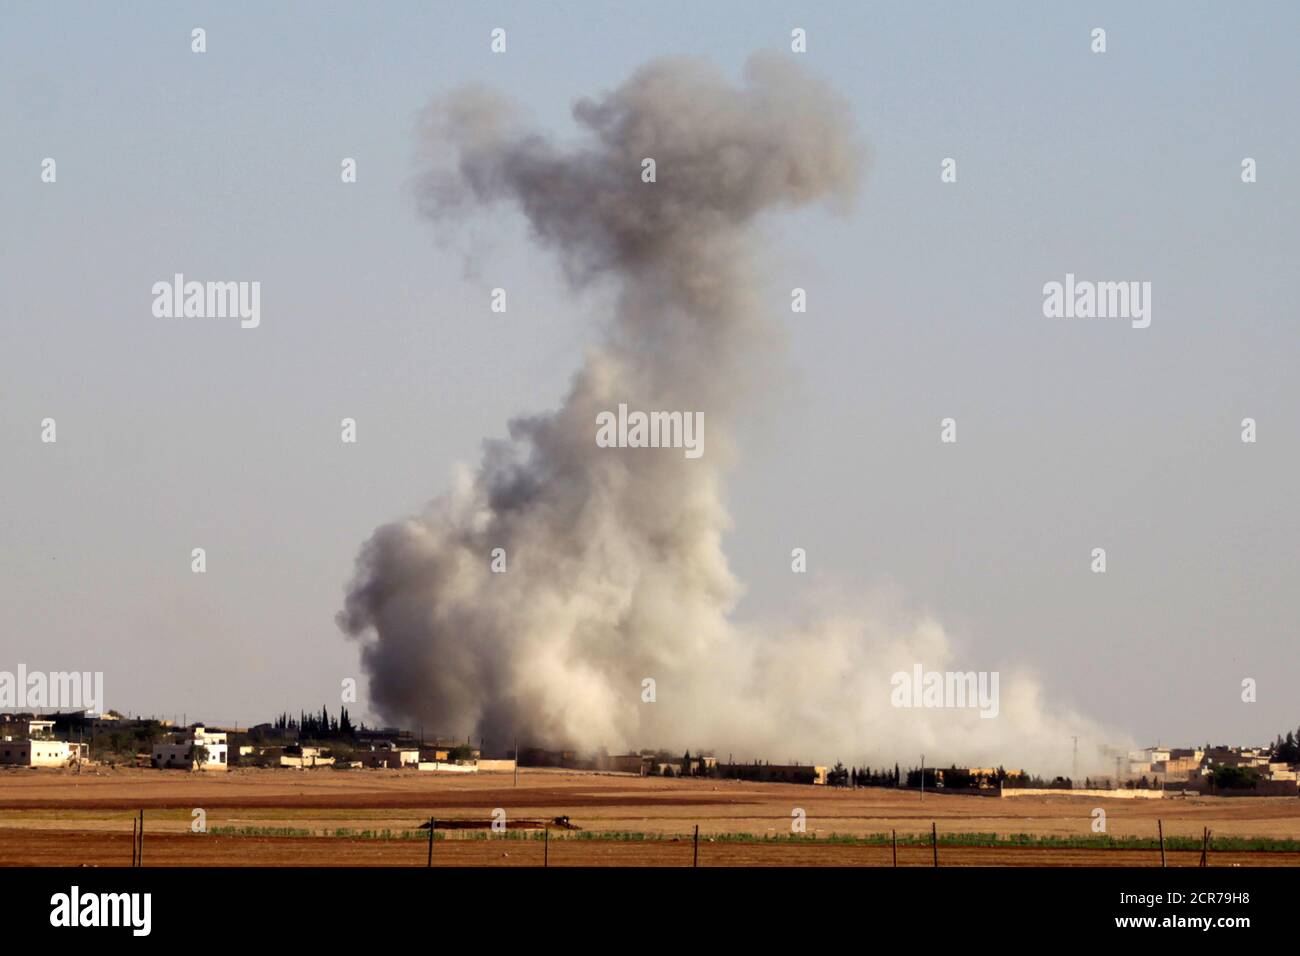 Smoke rises from airstrikes on Guzhe village, northern Aleppo countryside, Syria October 17, 2016. REUTERS/Khalil Ashawi Foto Stock